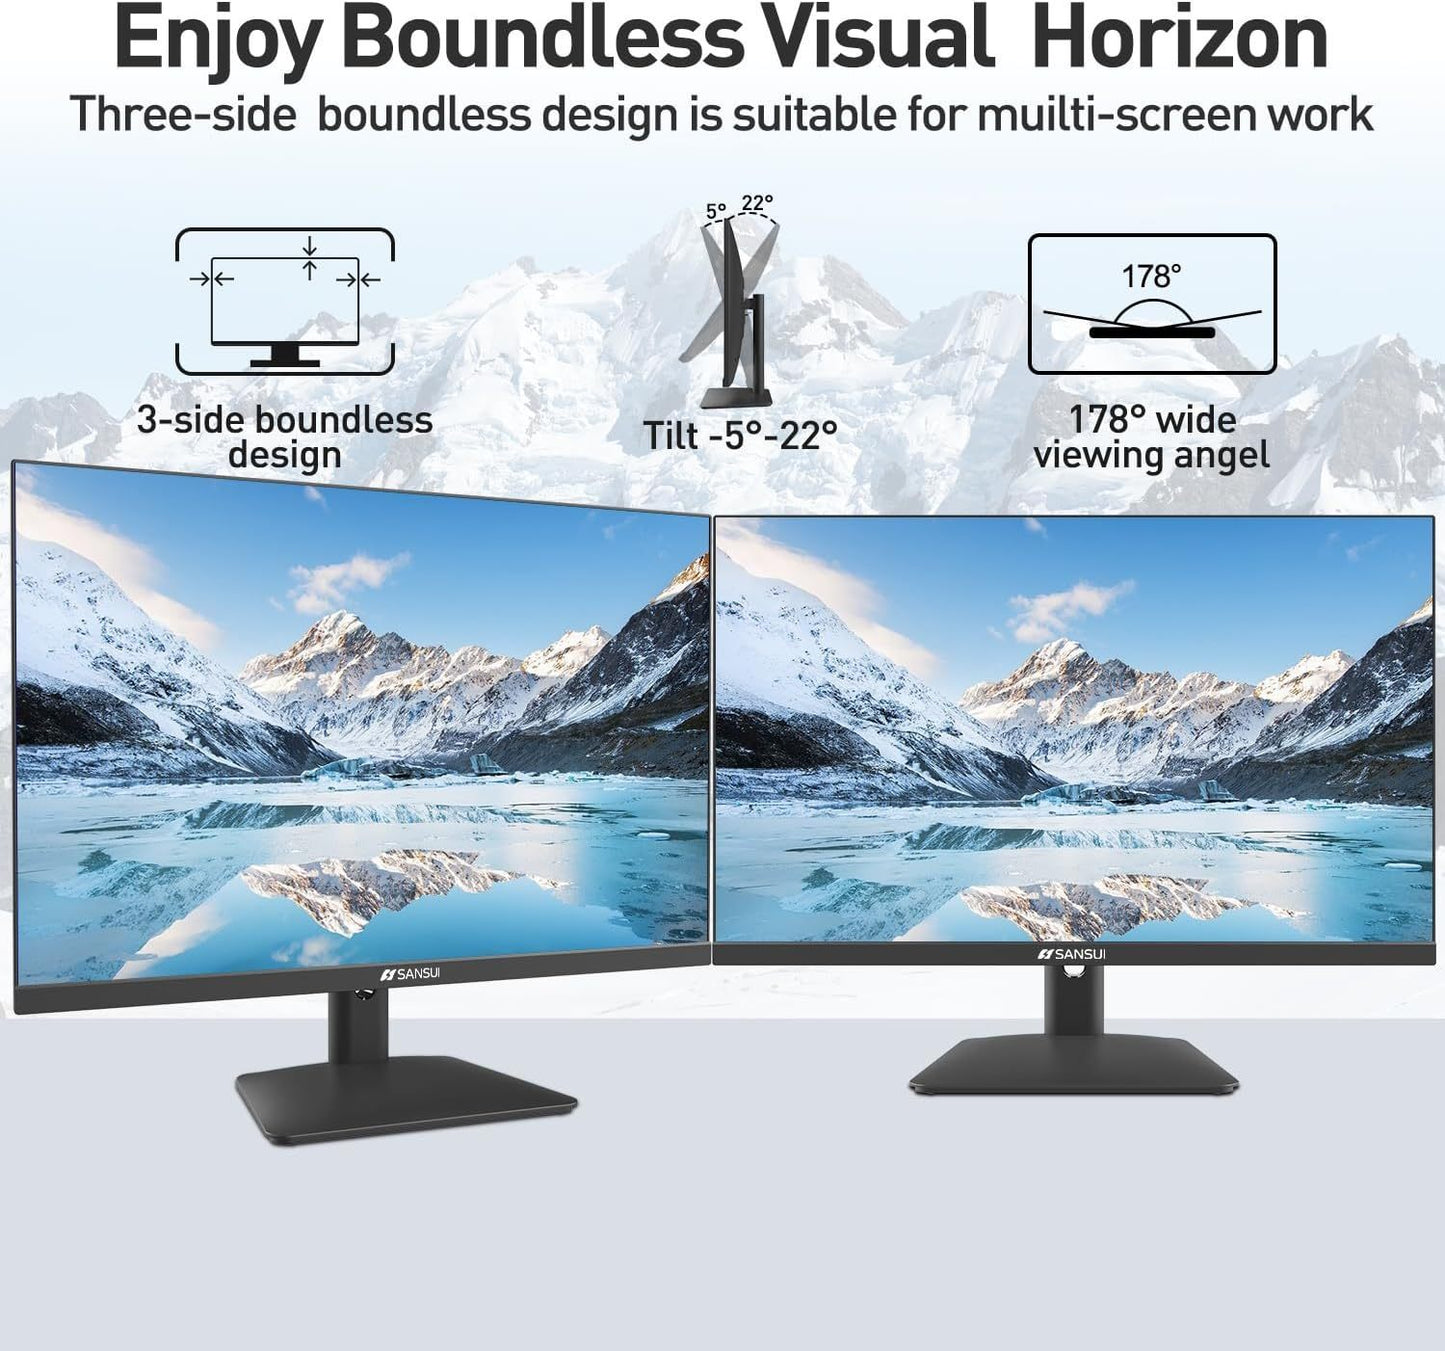 24 inch IPS FHD 1080P 75HZ HDR10 Computer Monitor